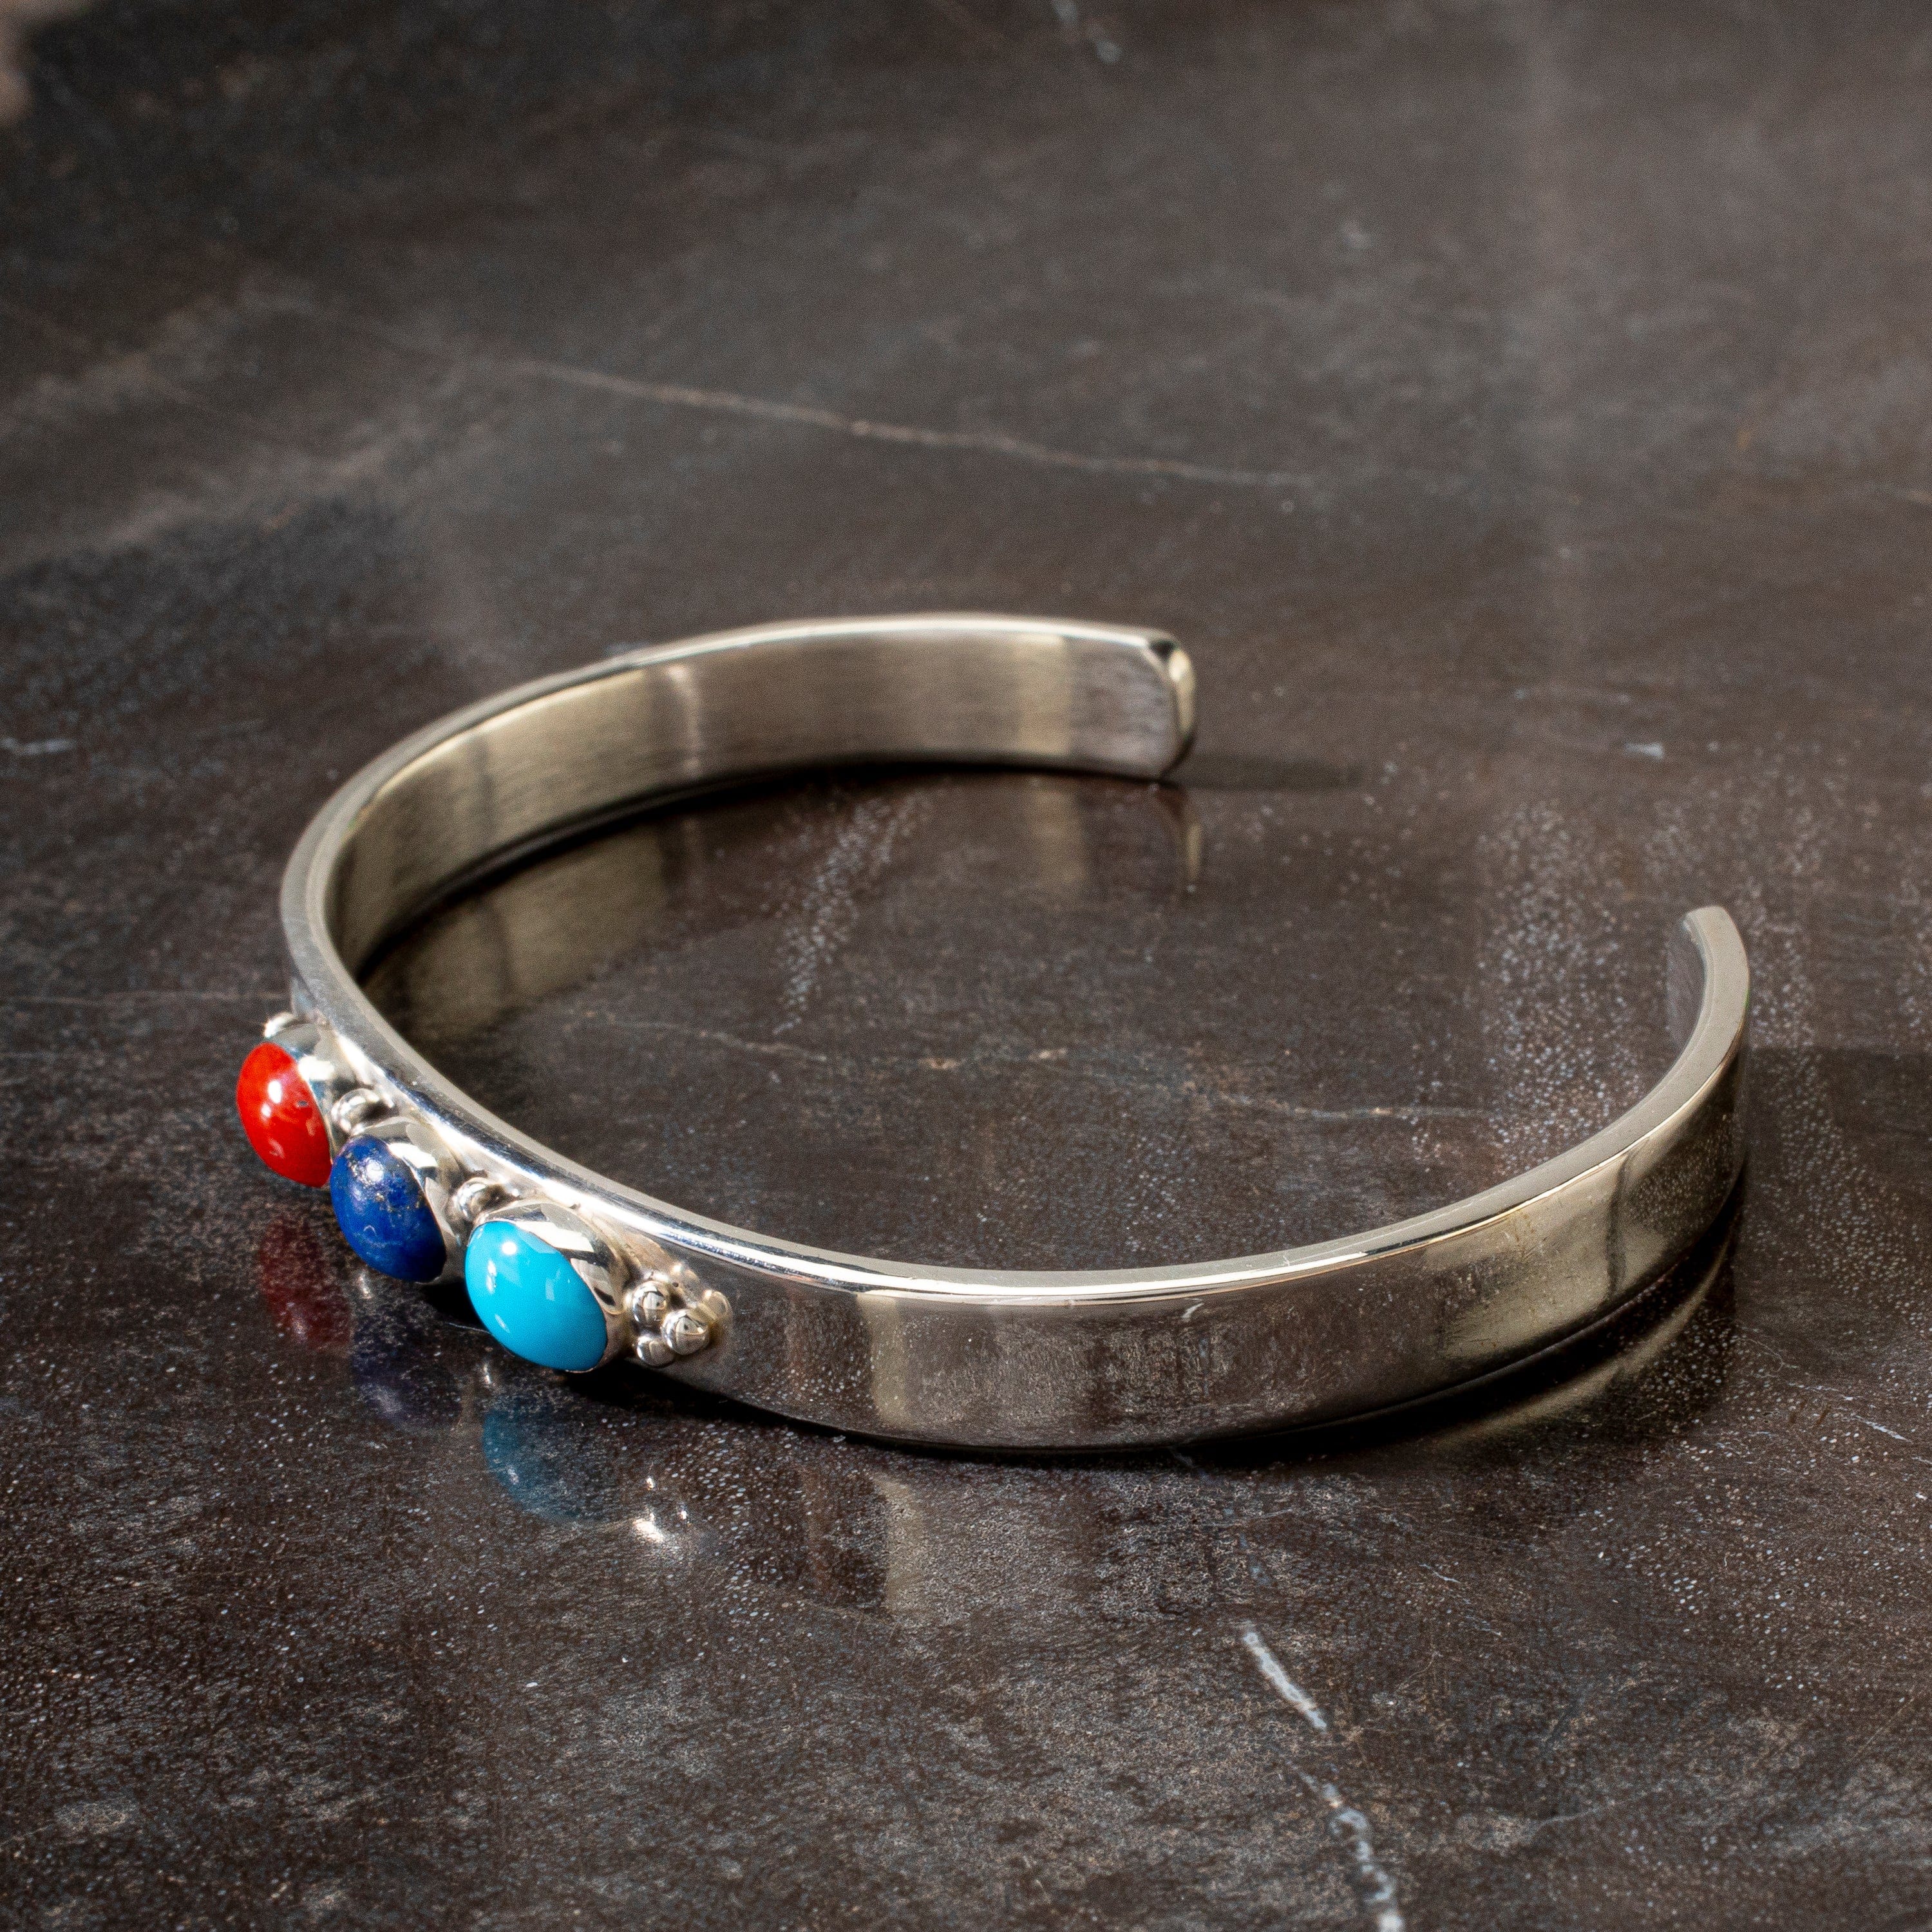 Kalifano Native American Jewelry Sleeping Beauty Turquoise, Coral, Lapis Navajo USA Native American Made 925 Sterling Silver Cuff NAB500.009